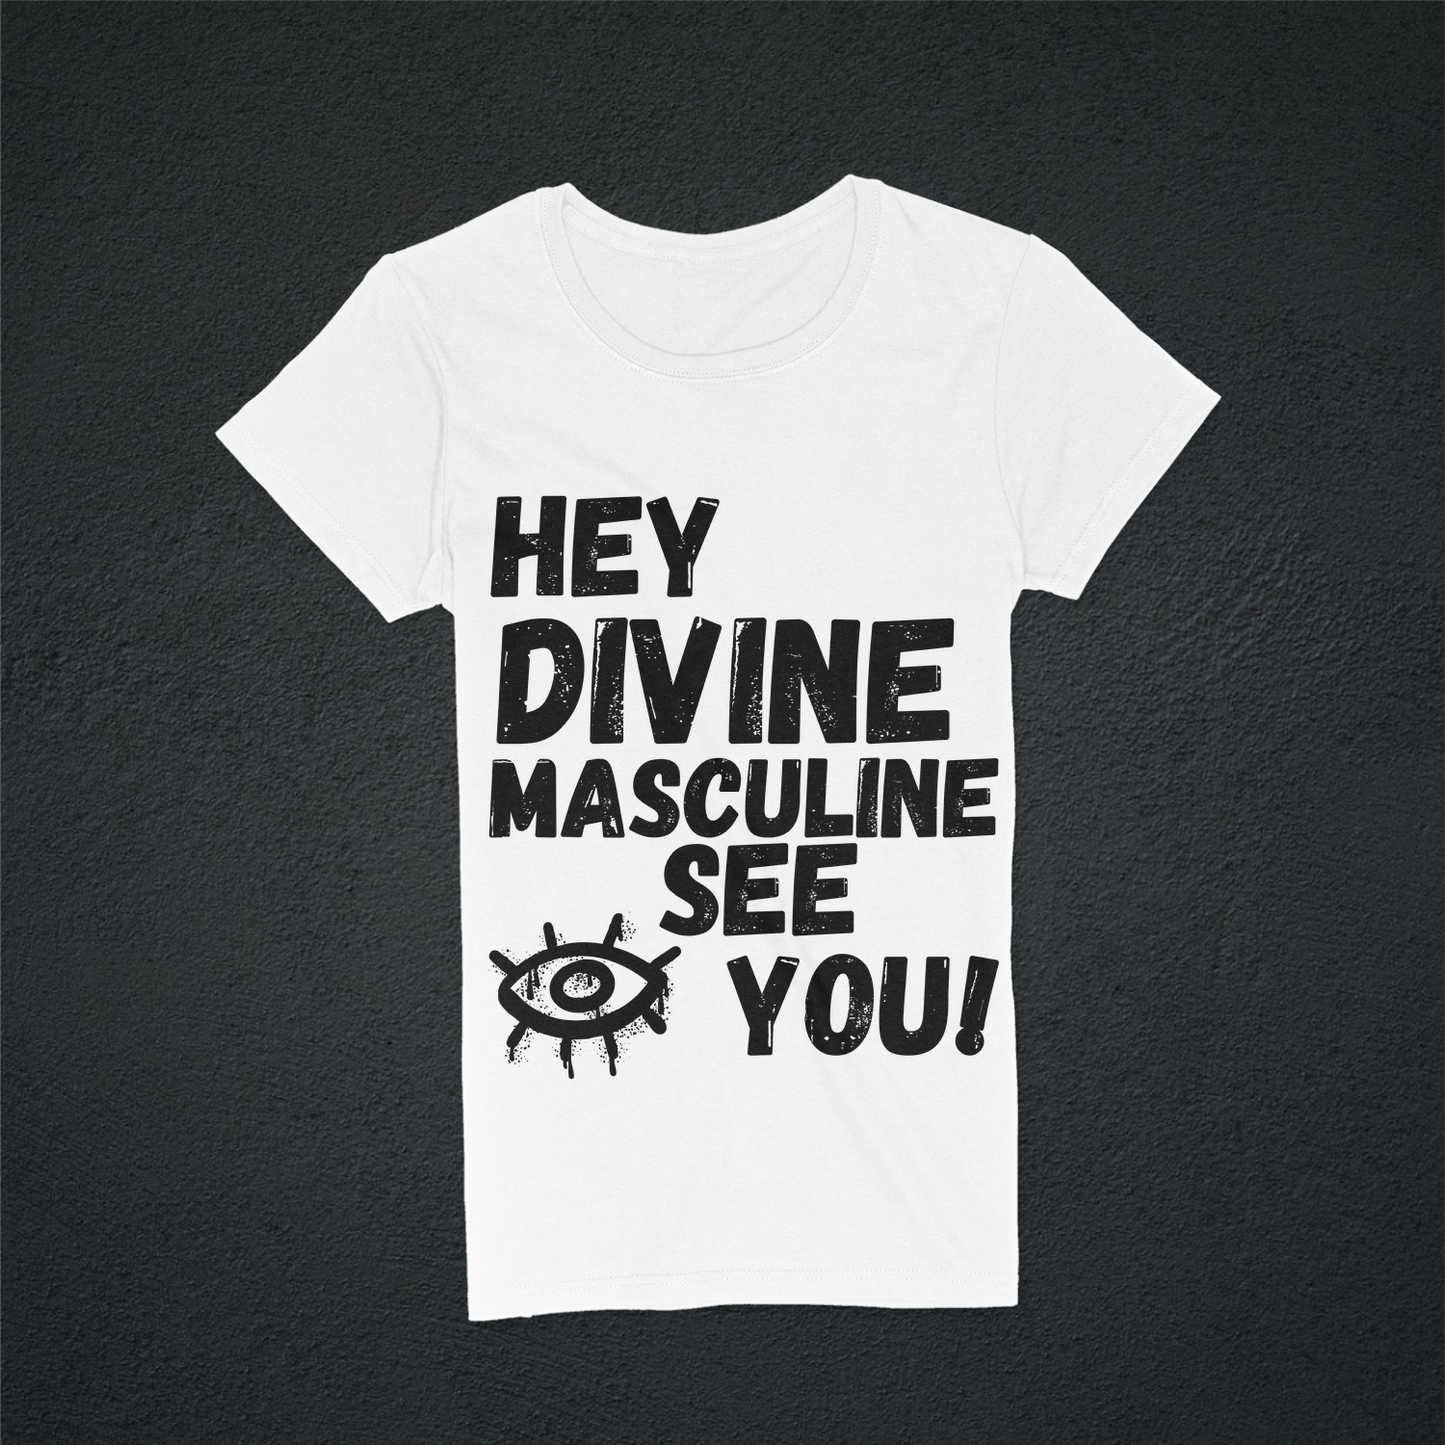 White colored women t-shirt with the text " HEY DIVINE MASCULINE I (a picture of a eye) SEE YOU! in black